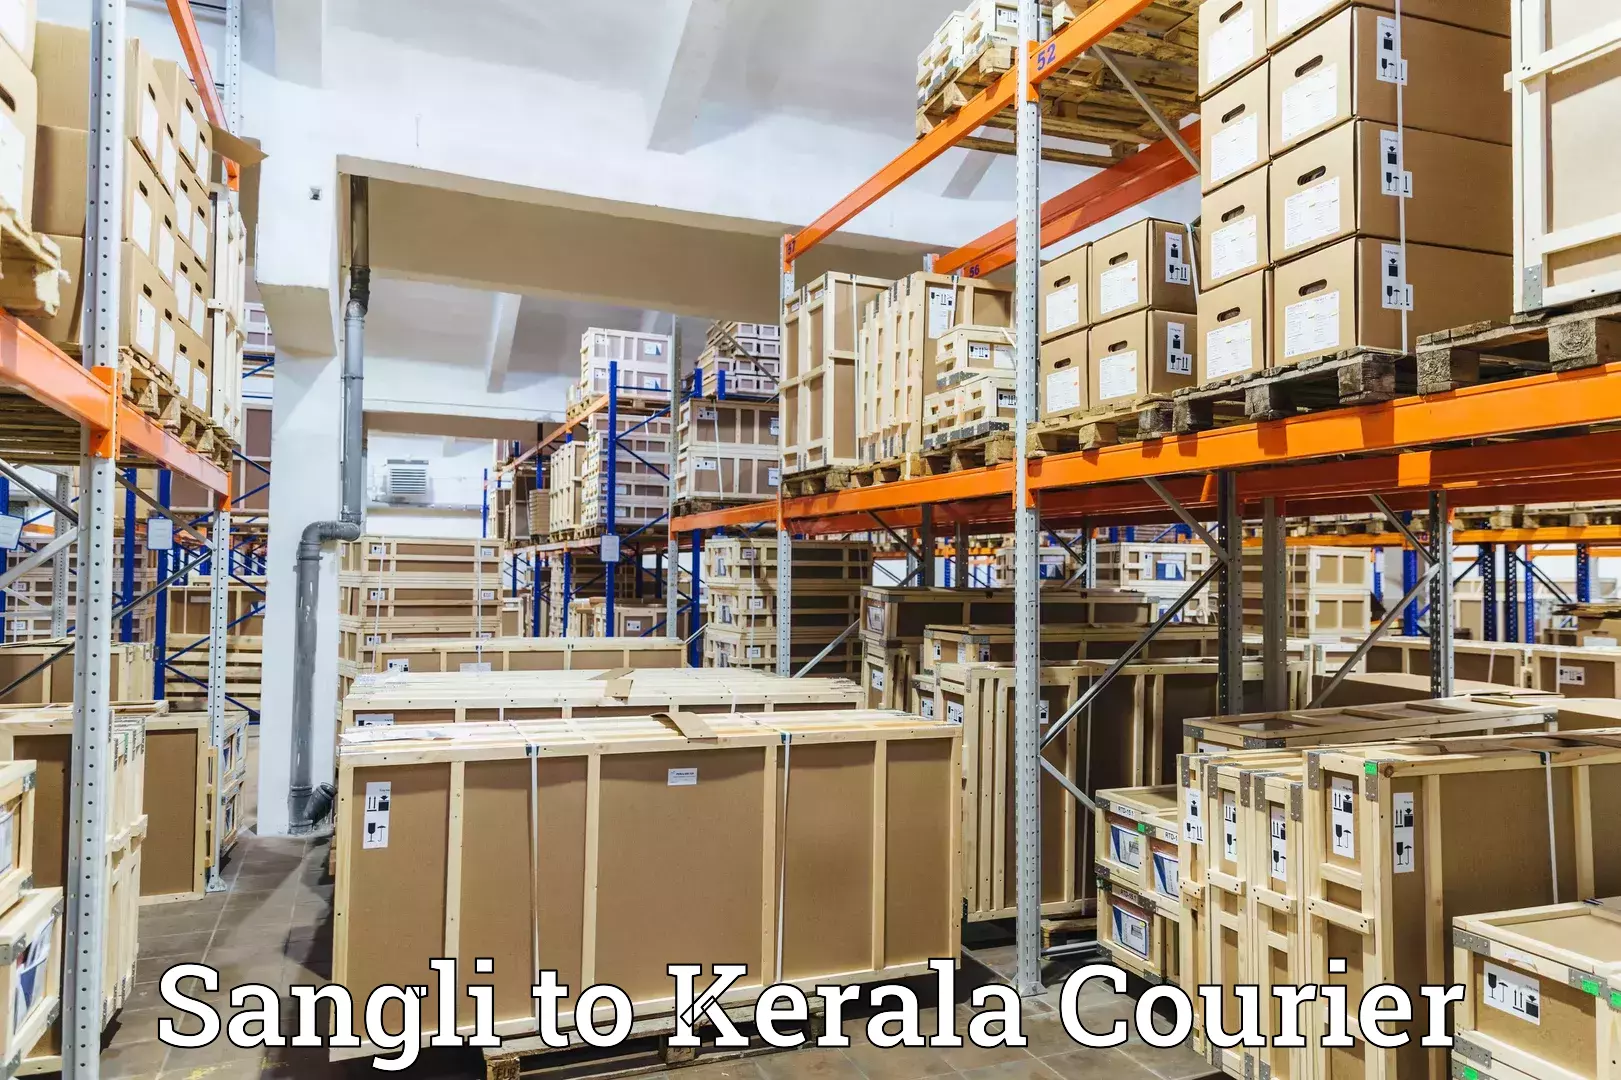 Nationwide parcel services Sangli to Kottayam